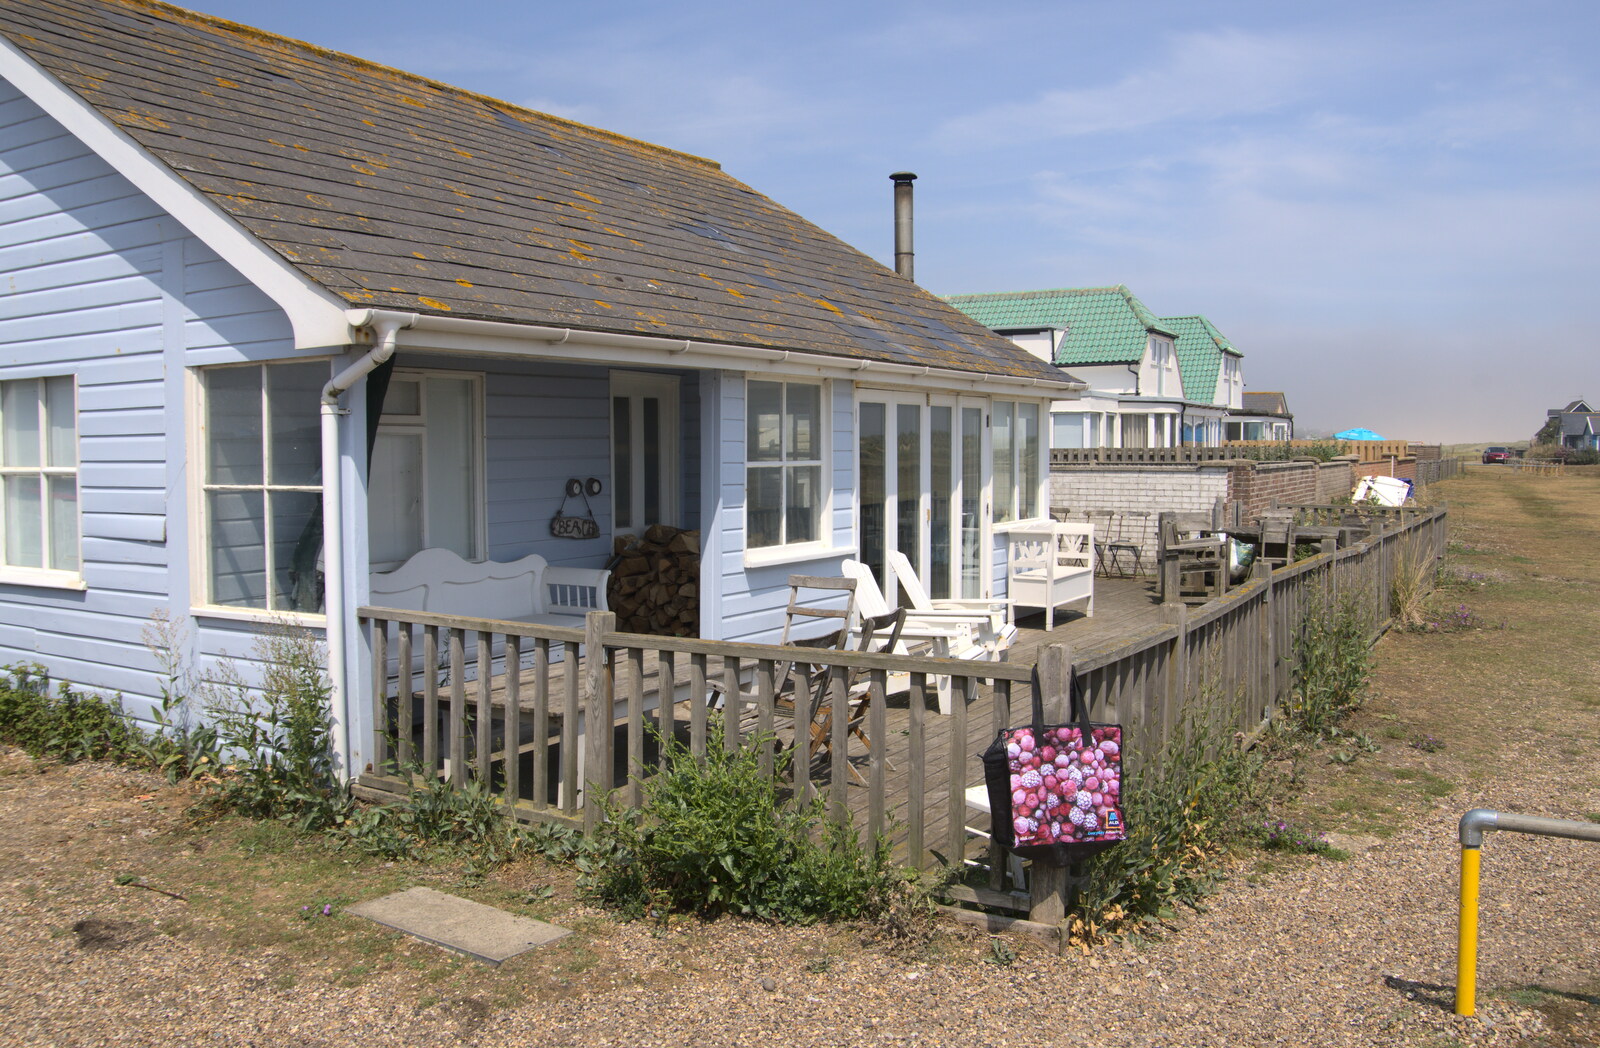 A nice wooden house on the beach from A Return to Southwold, Suffolk - 14th June 2020